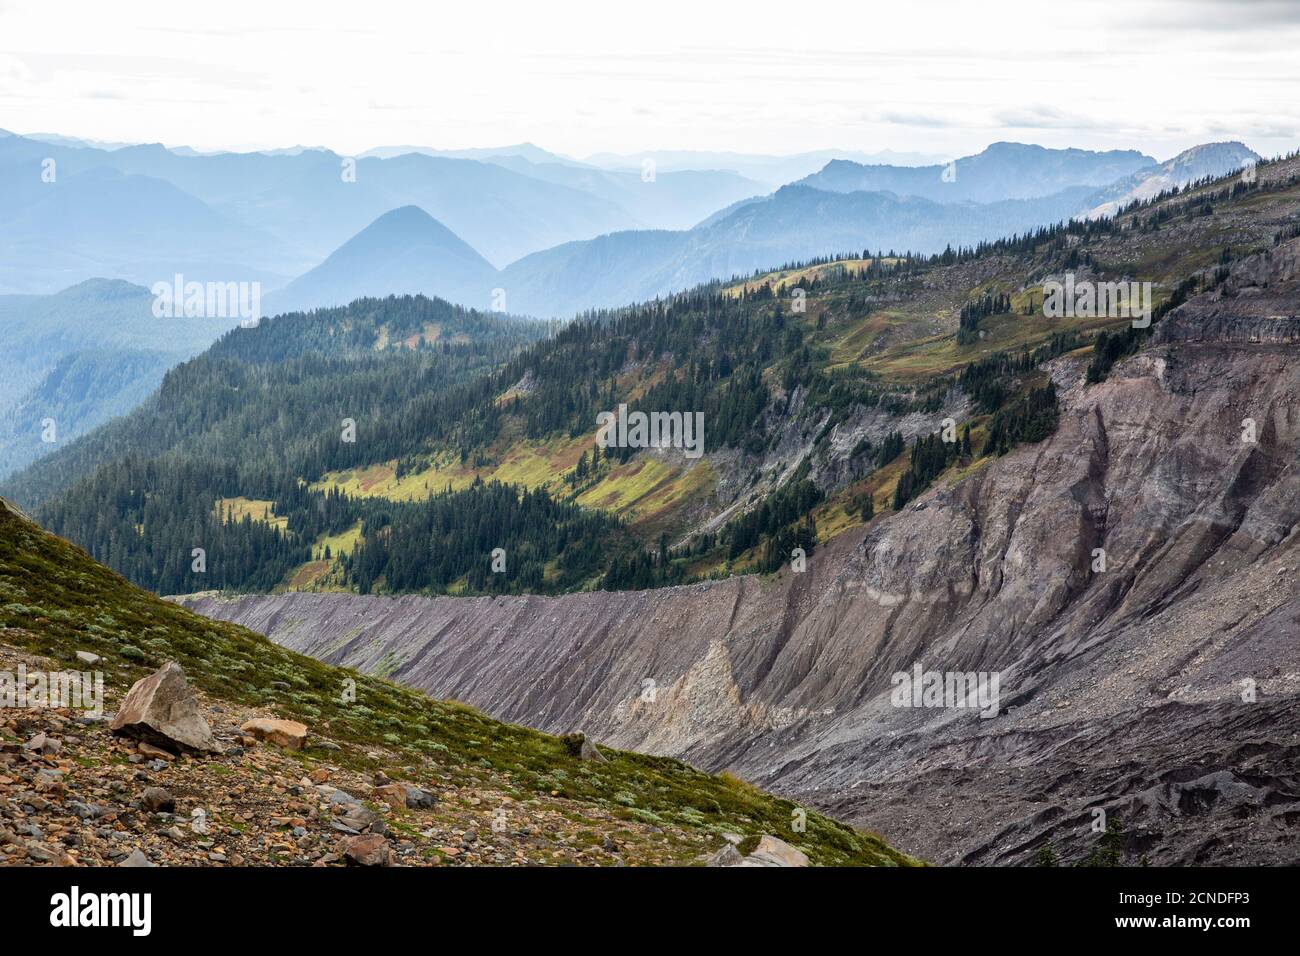 Views of the Nisqually Glacier retreat from the Skyline Trail, Mount Rainier National Park, Washington State, United States of America Stock Photo